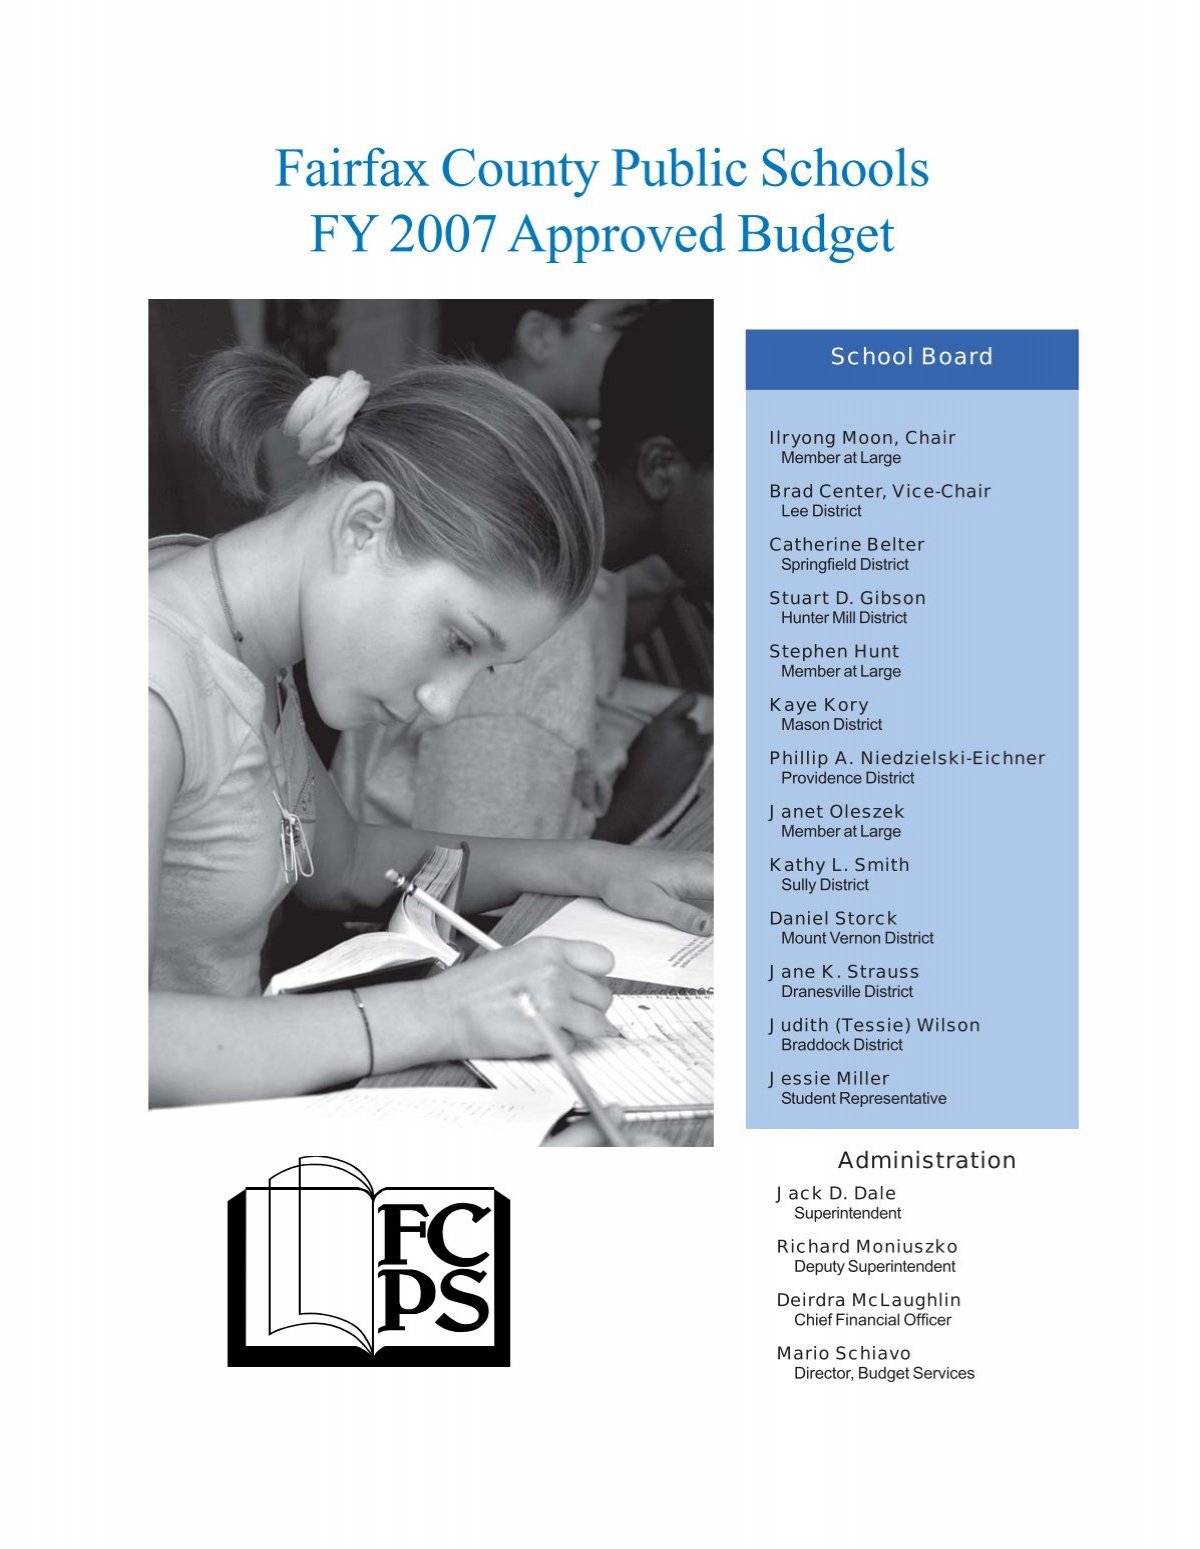 00 inside front cover.pmd - Fairfax County Public Schools